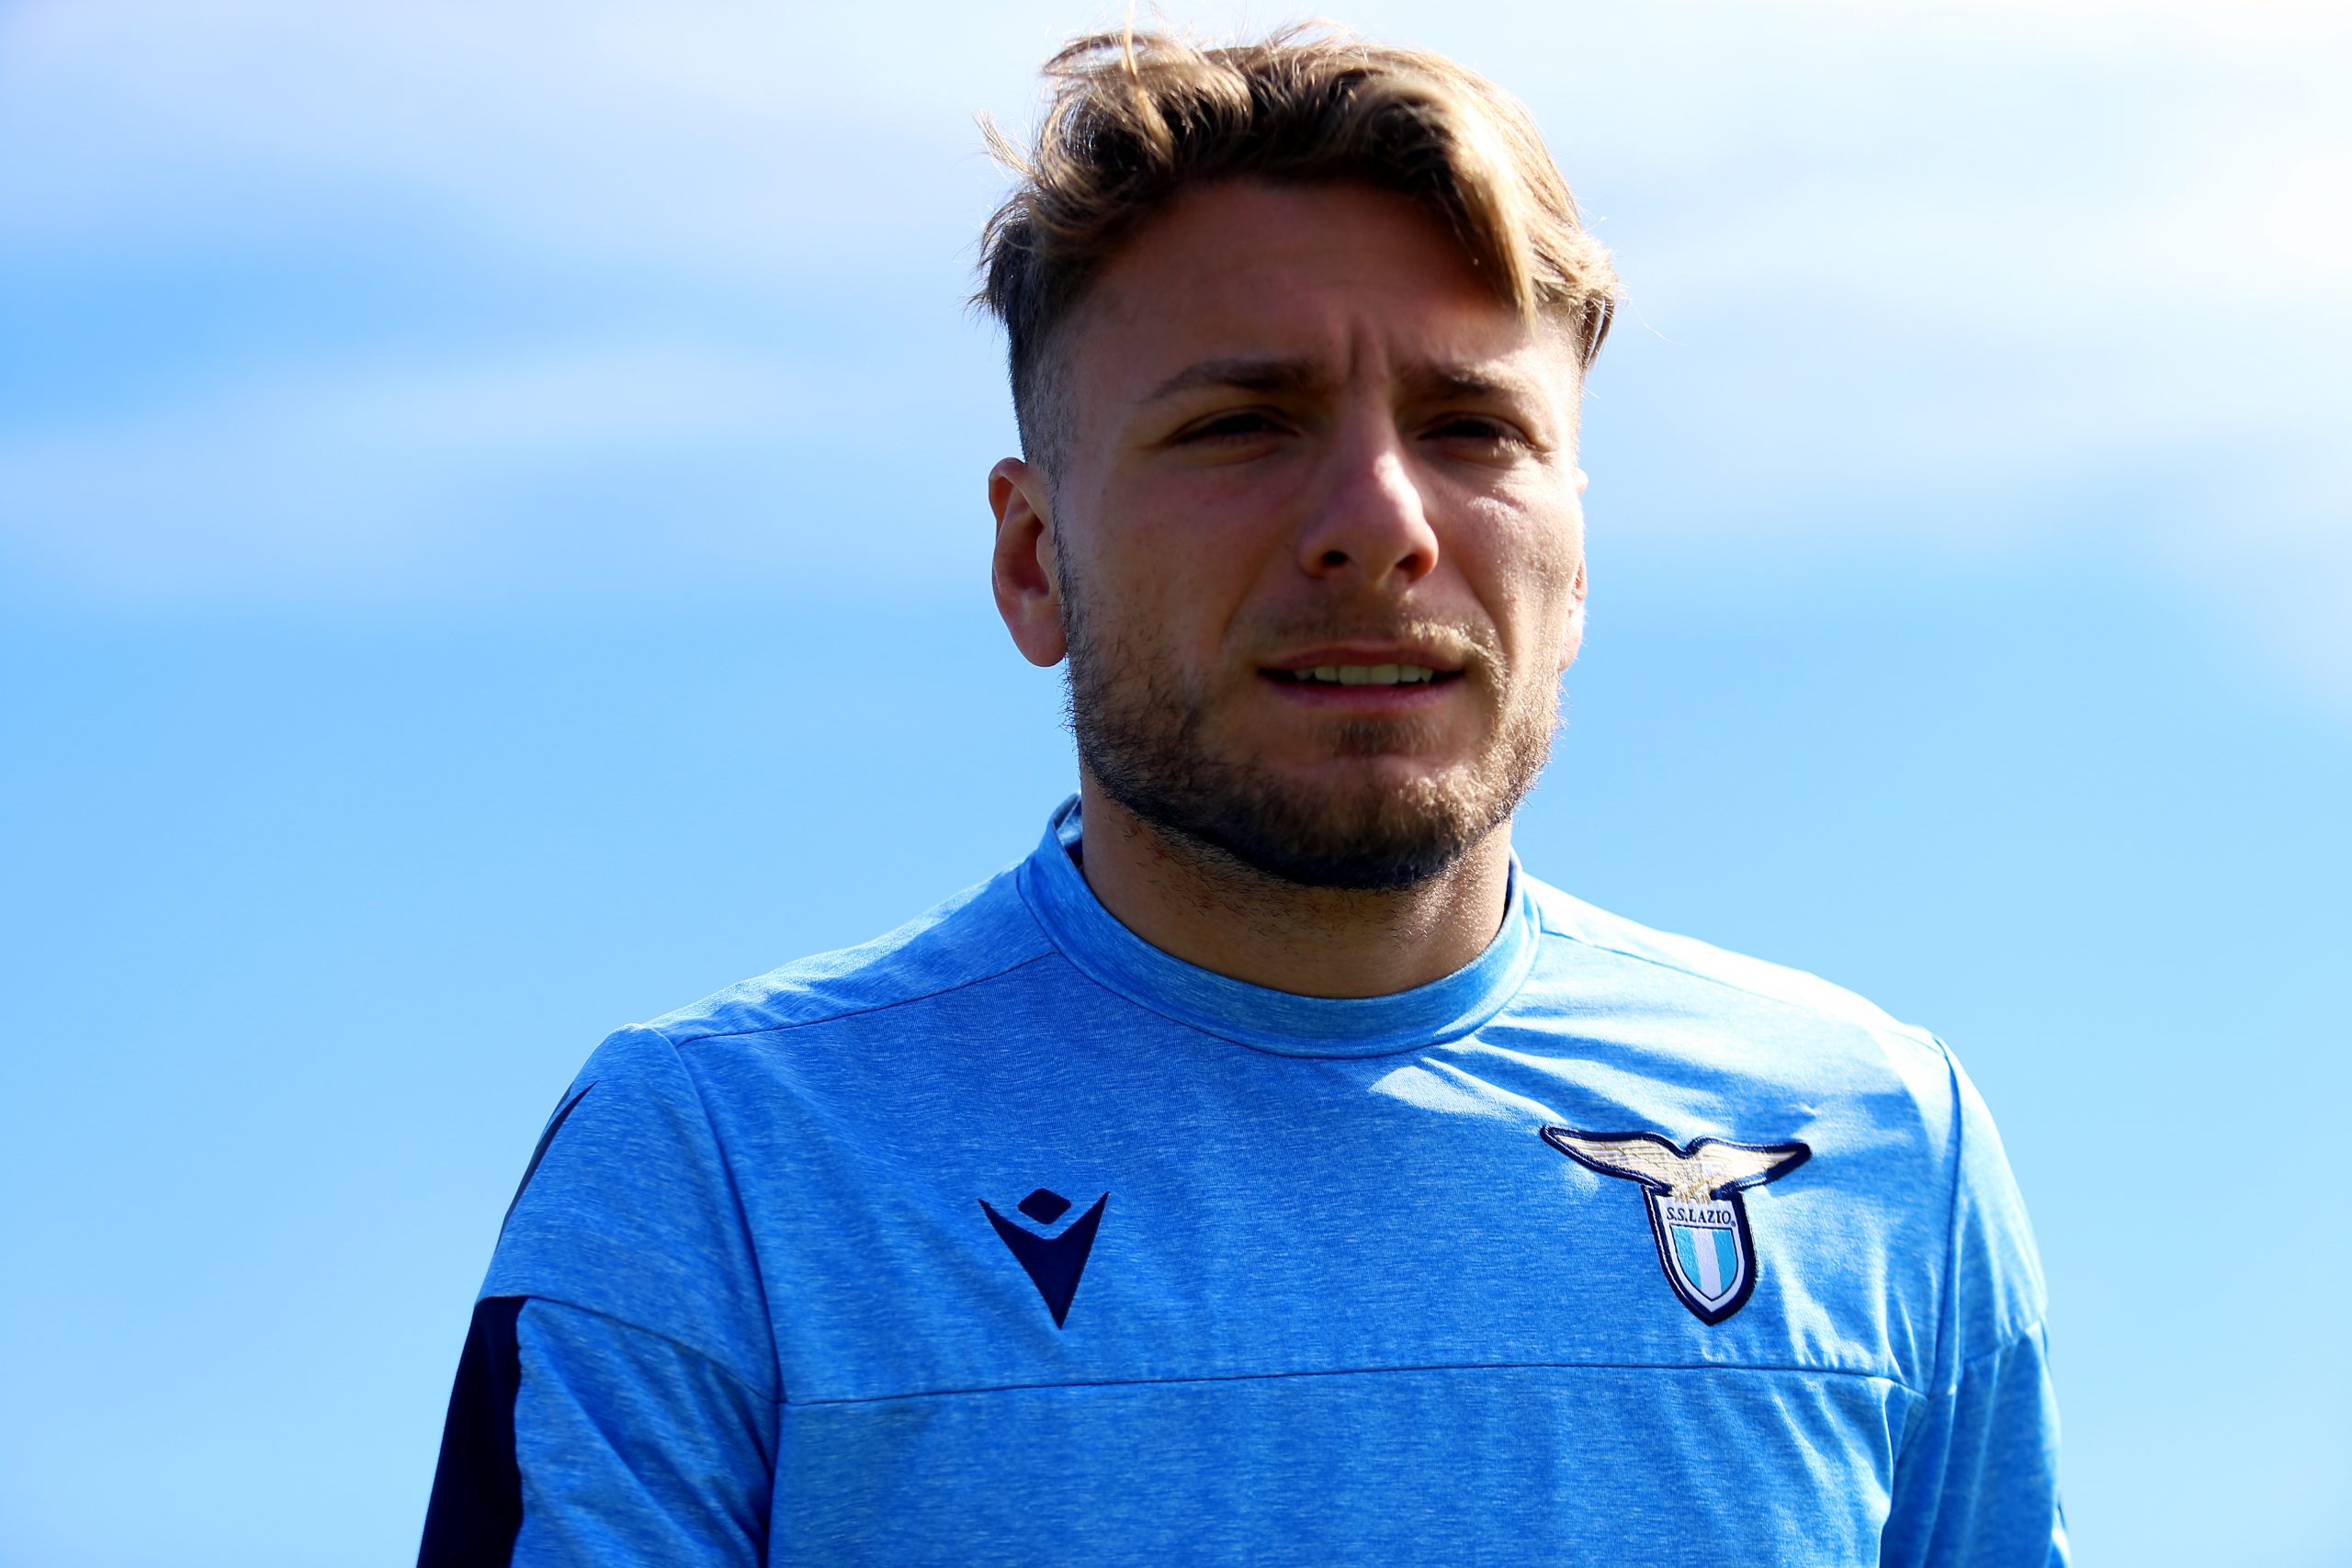 Tottenham Hotspur eyeing a move for Ciro Immobile who is seen in the photo